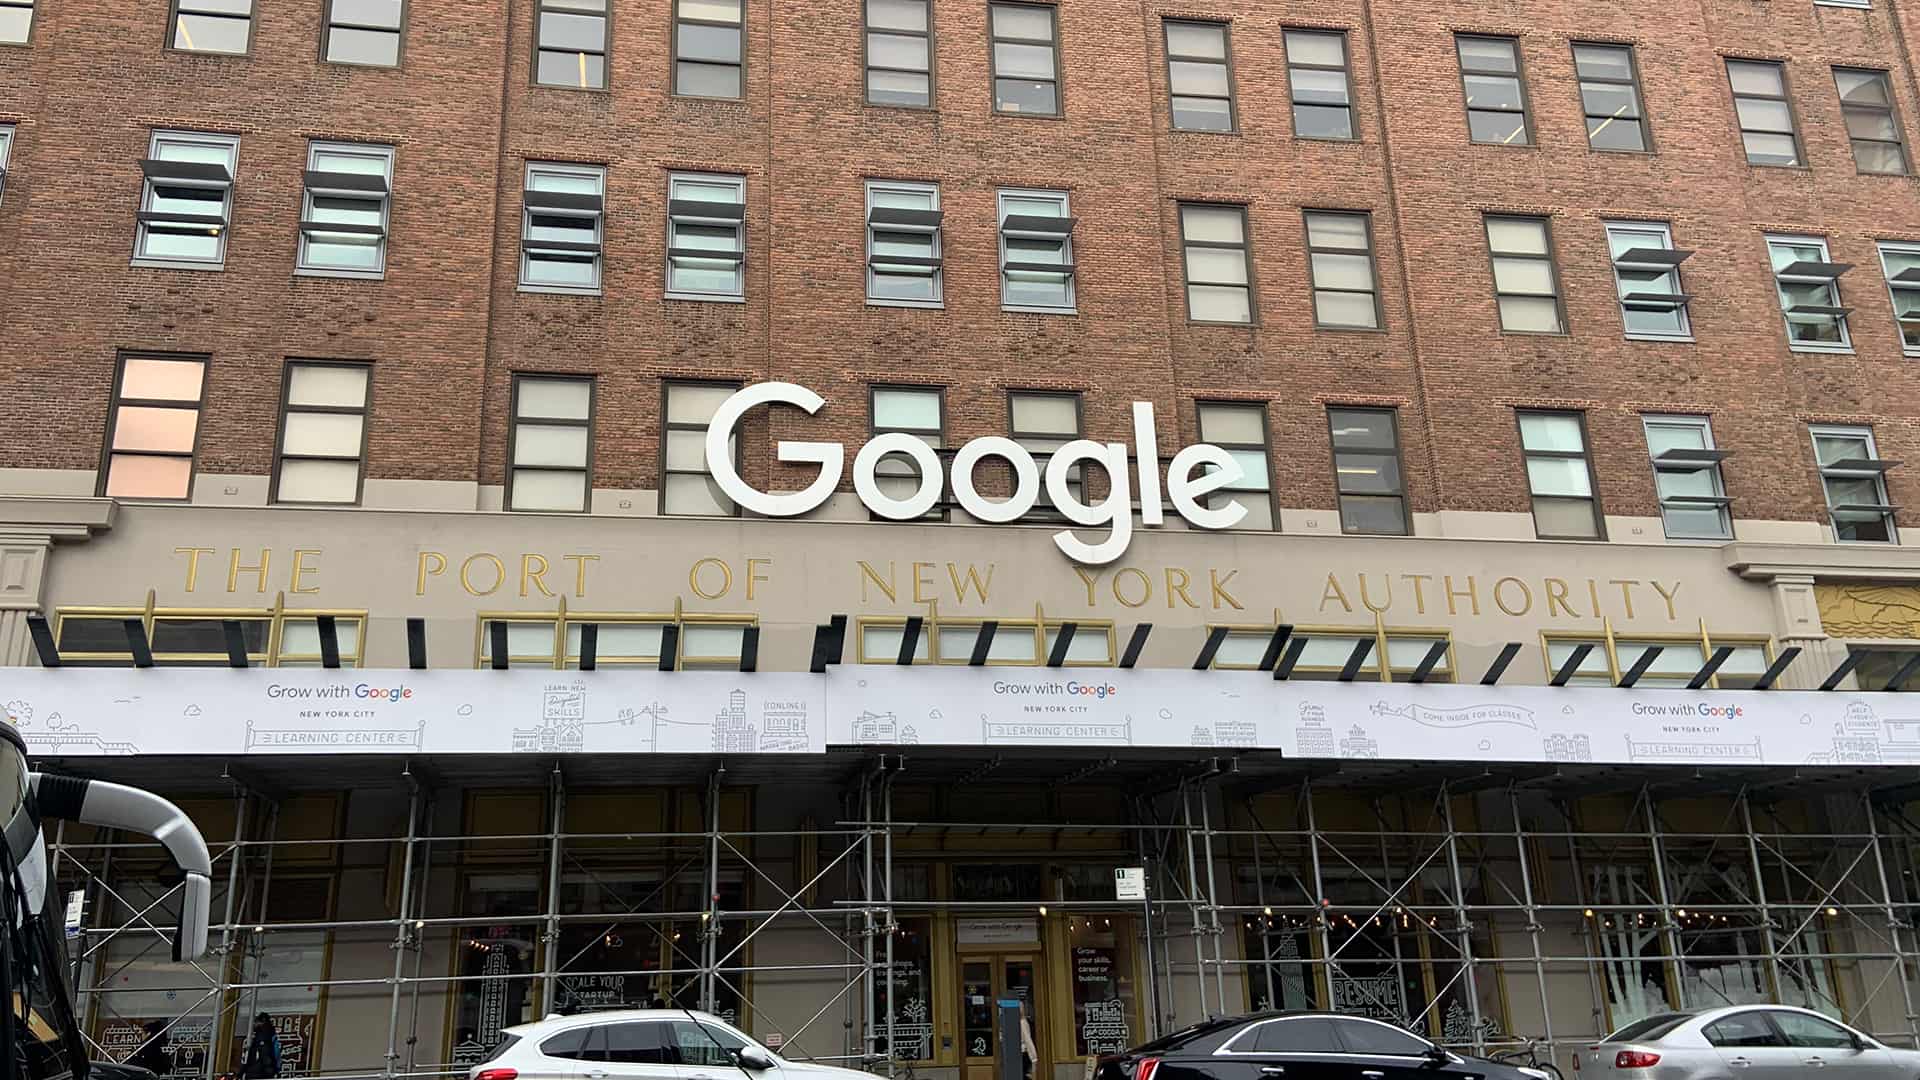 The Google NYC building